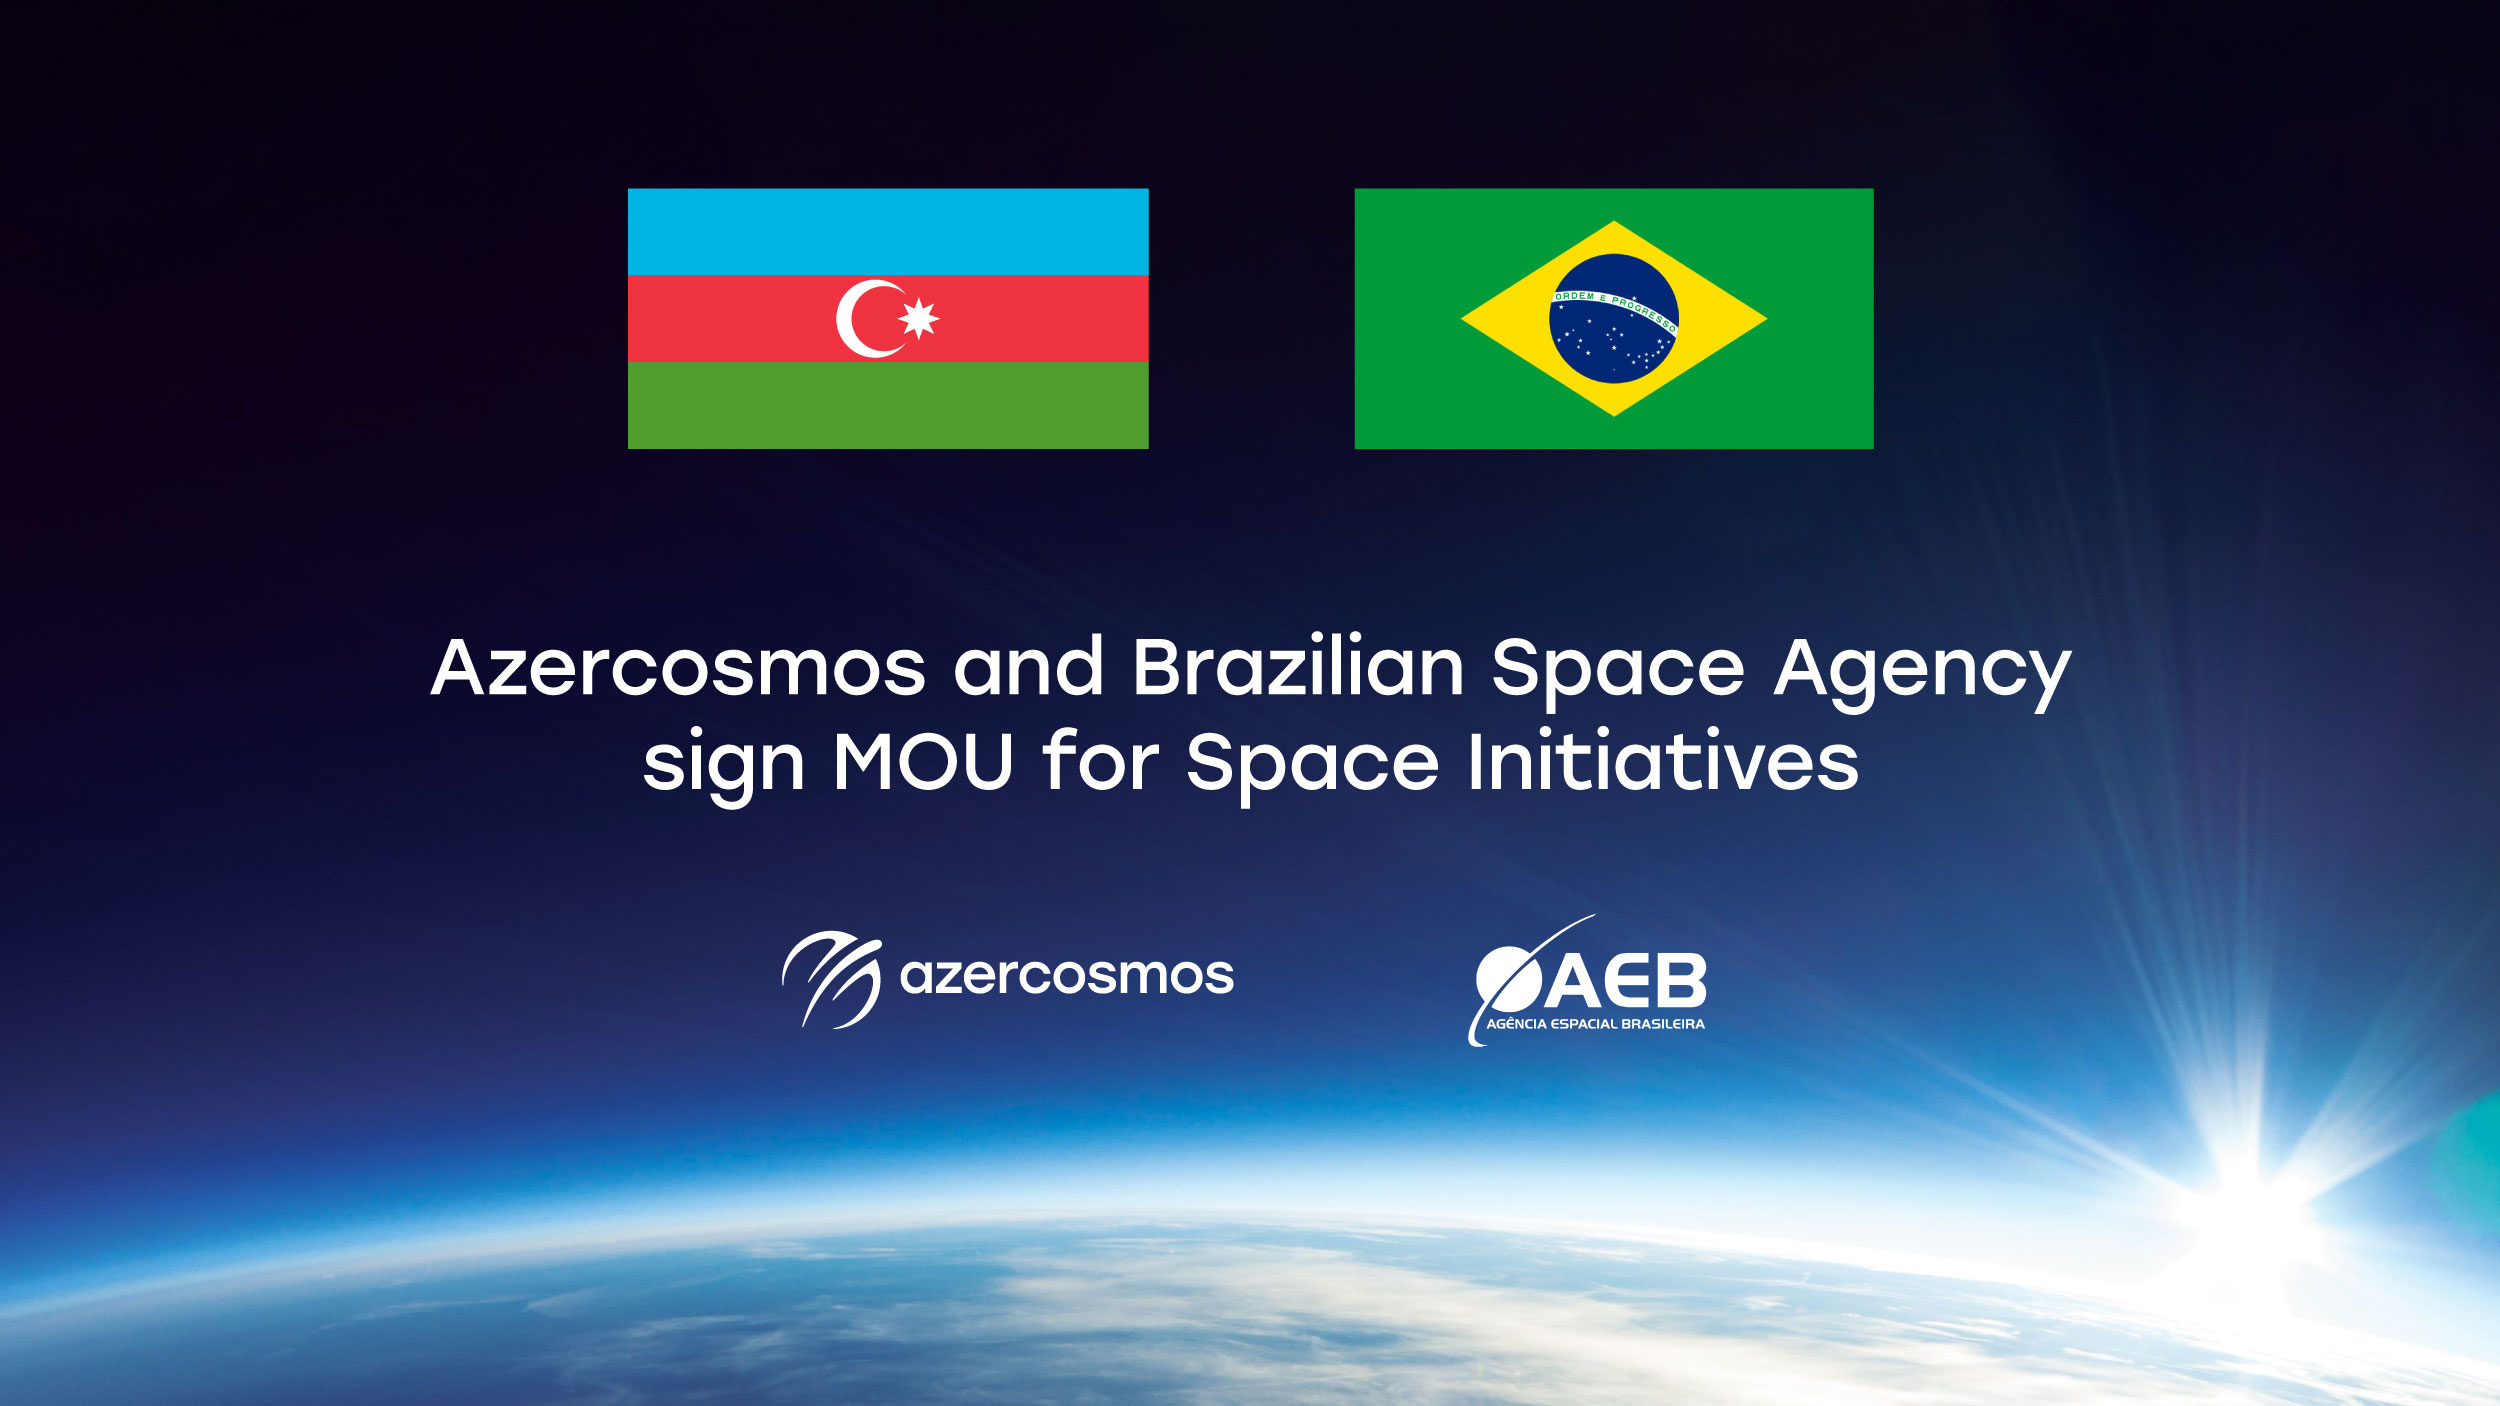 Azercosmos and Brazilian Space Agency sign MOU for Space Initiatives